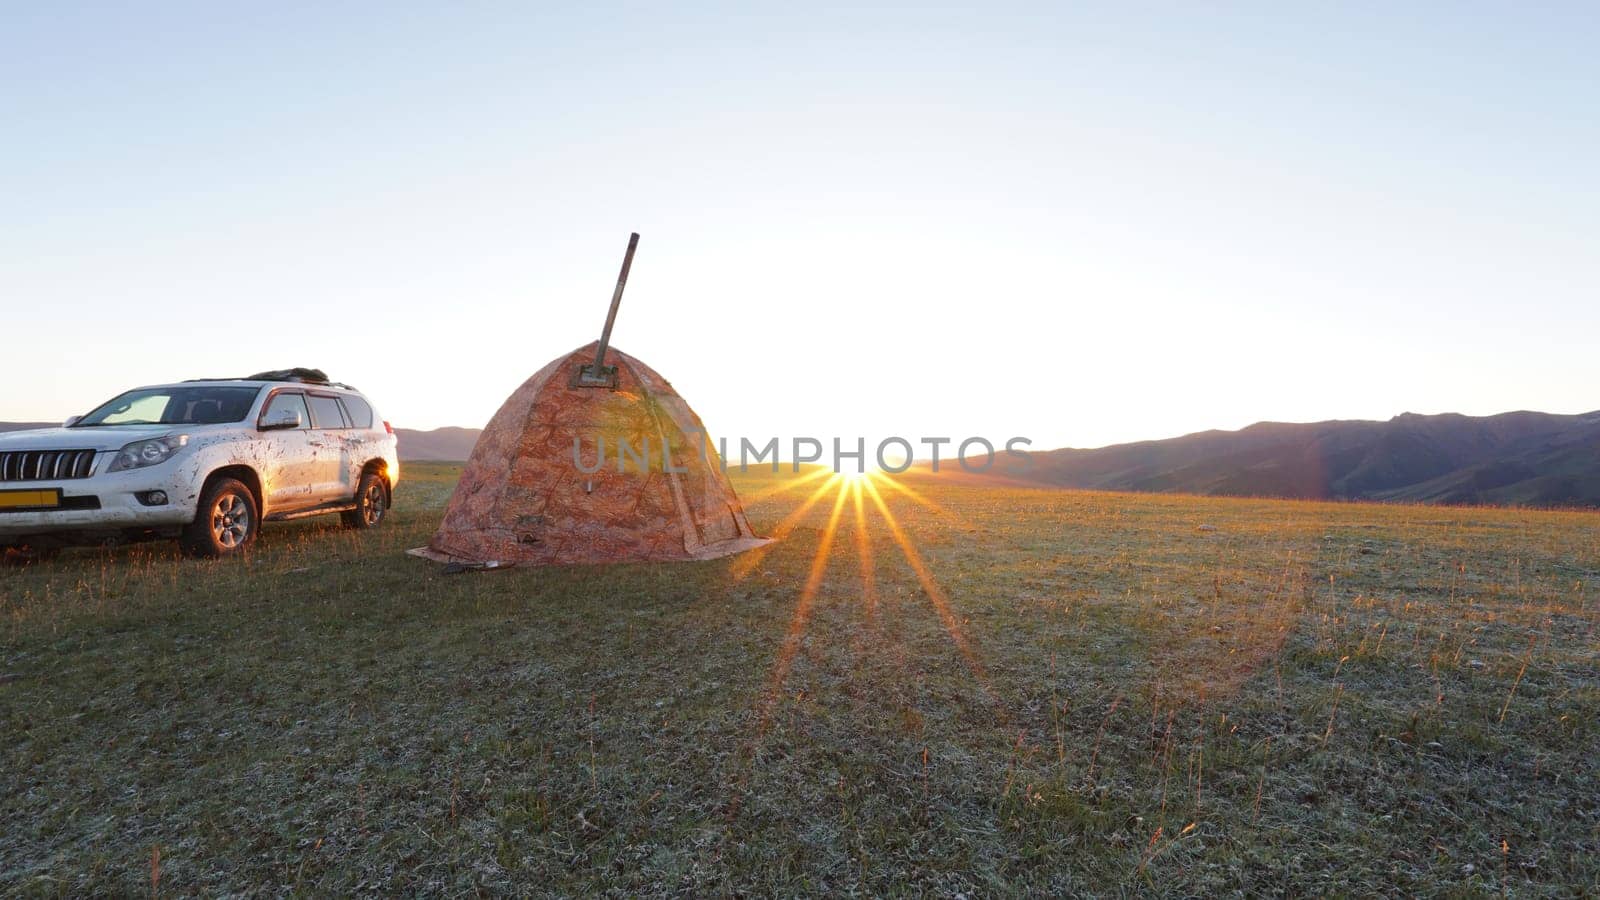 Sunrise among green fields and hills. Camping. Camping. There is a tent, there is smoke from the stove. There is a white SUV car nearby. The sun rays come out from behind the horizon. Kazakhstan